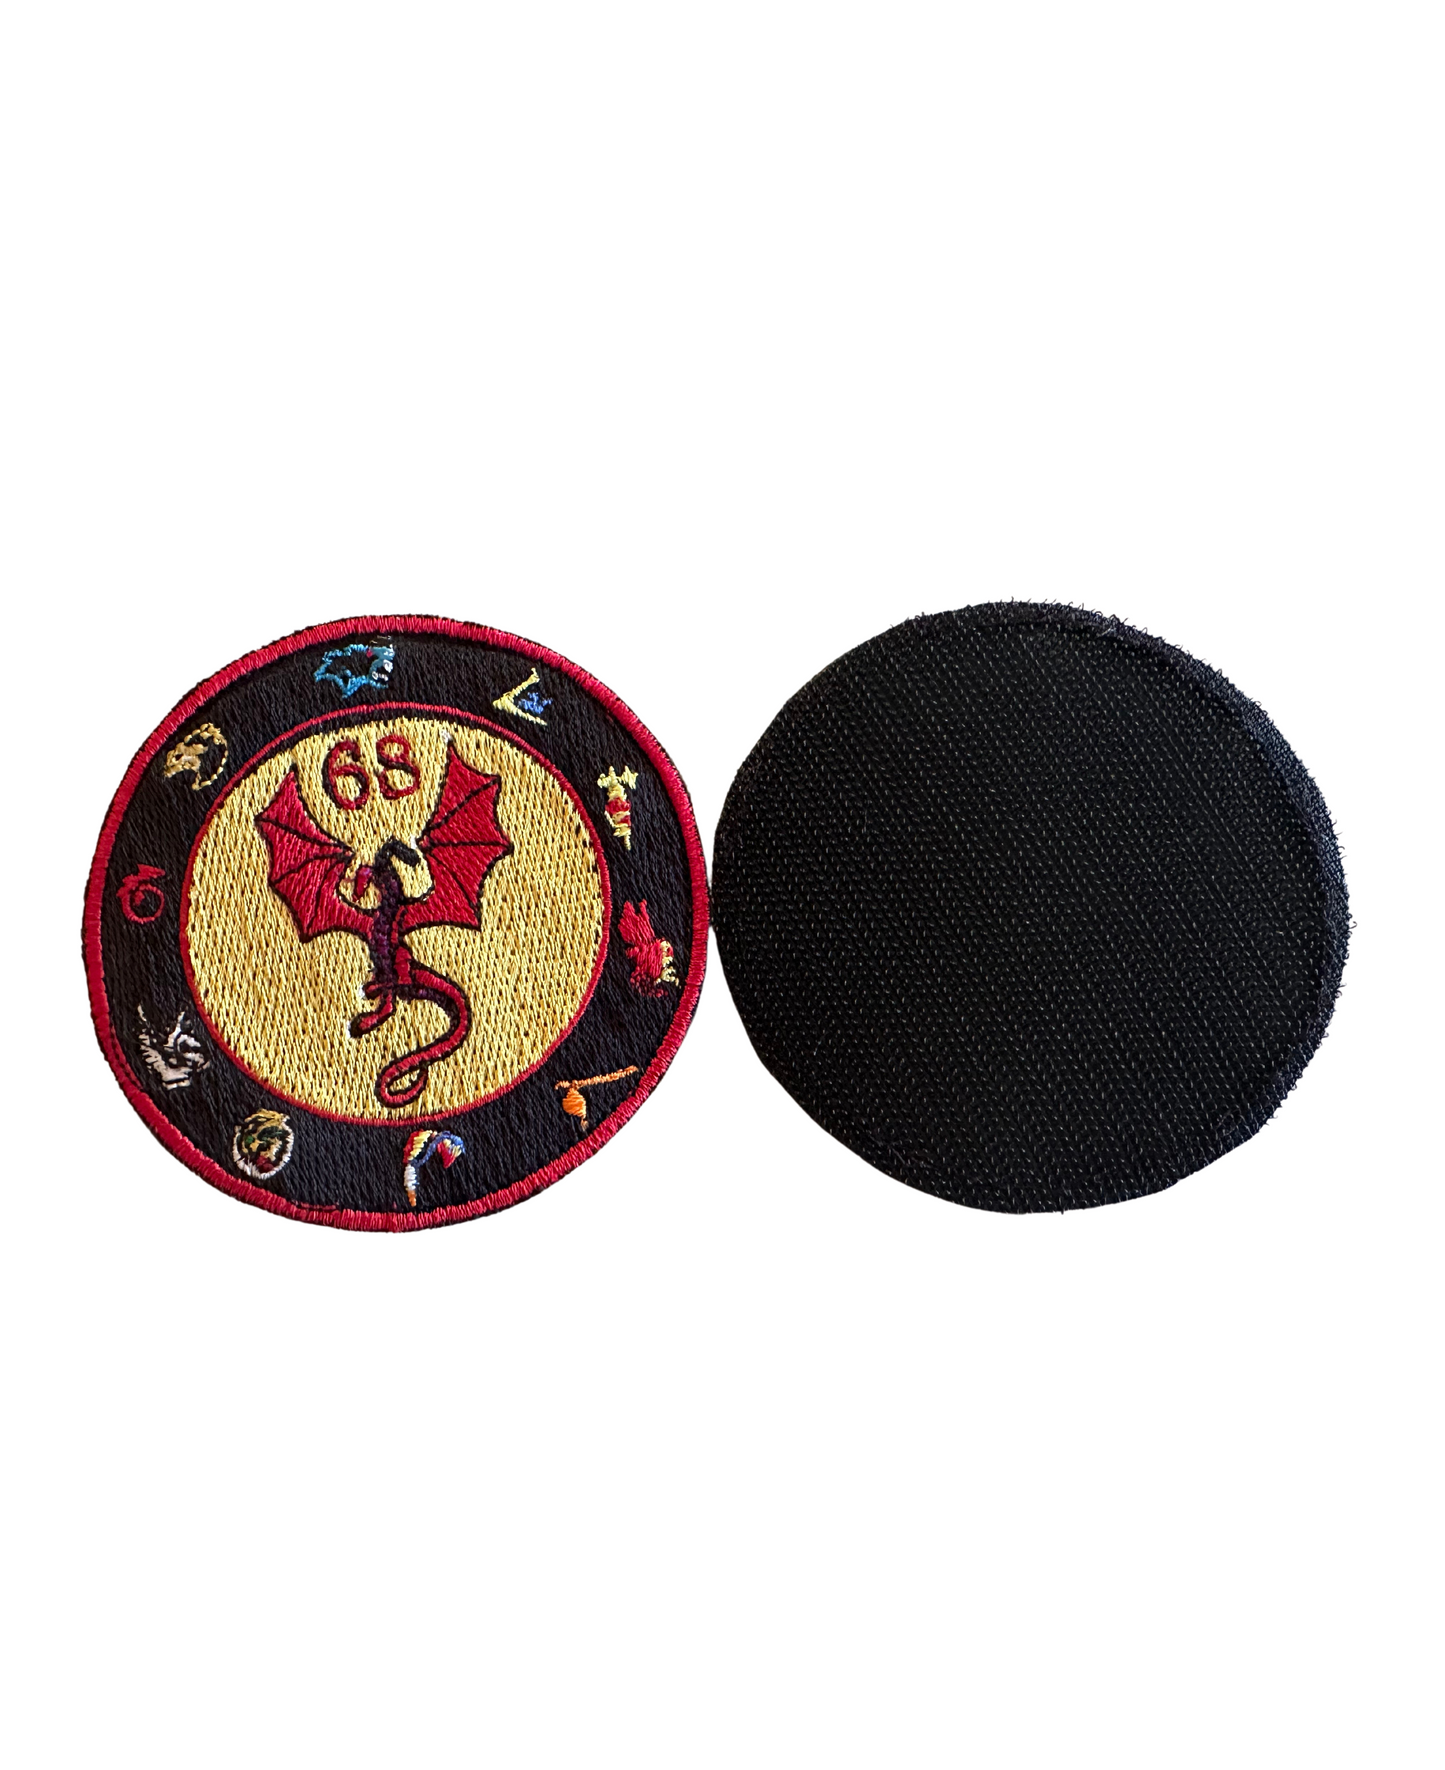 VAQ-139 Command Patch - Embroidery